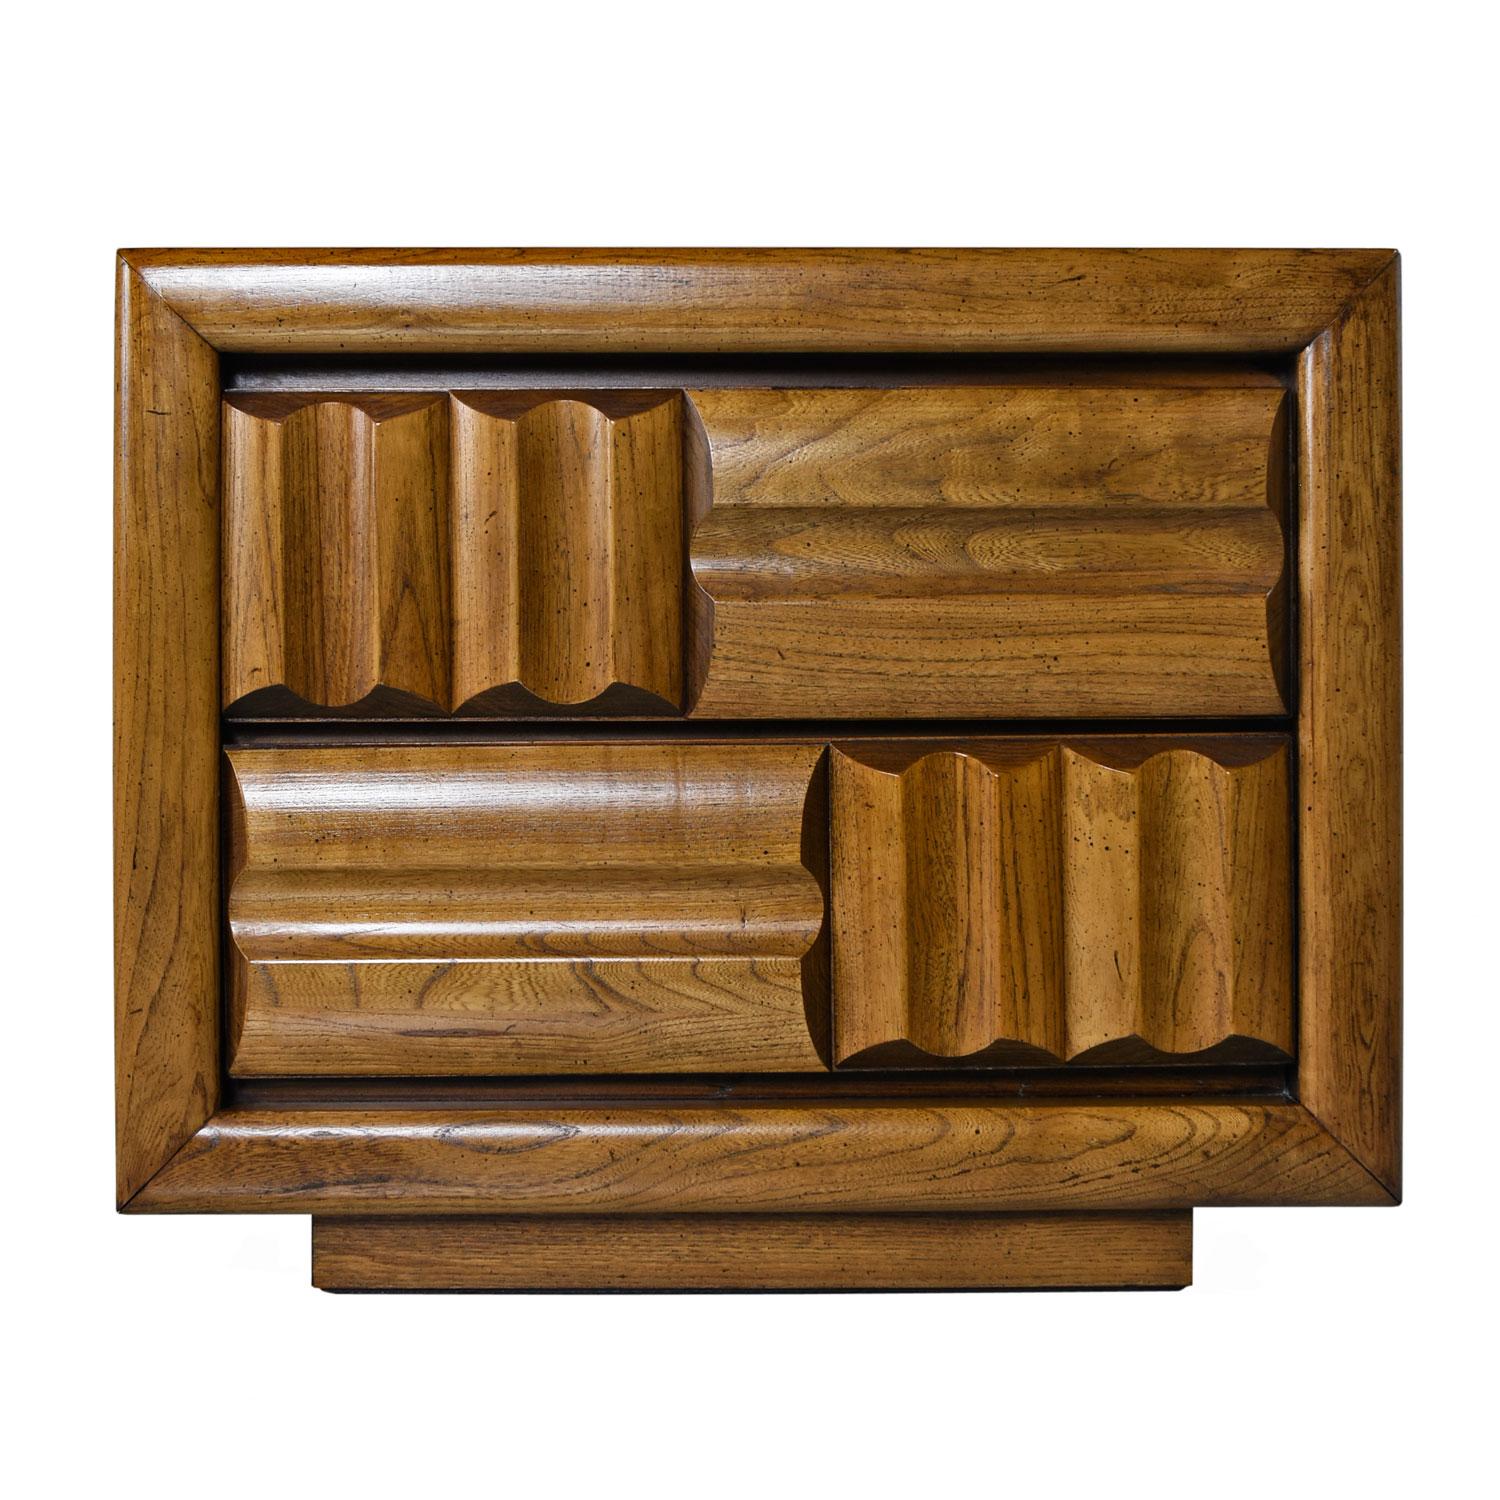 Late 20th Century Midcentury Brutalist Oak Nightstand End Tables, Carved Wood Drawer Fronts